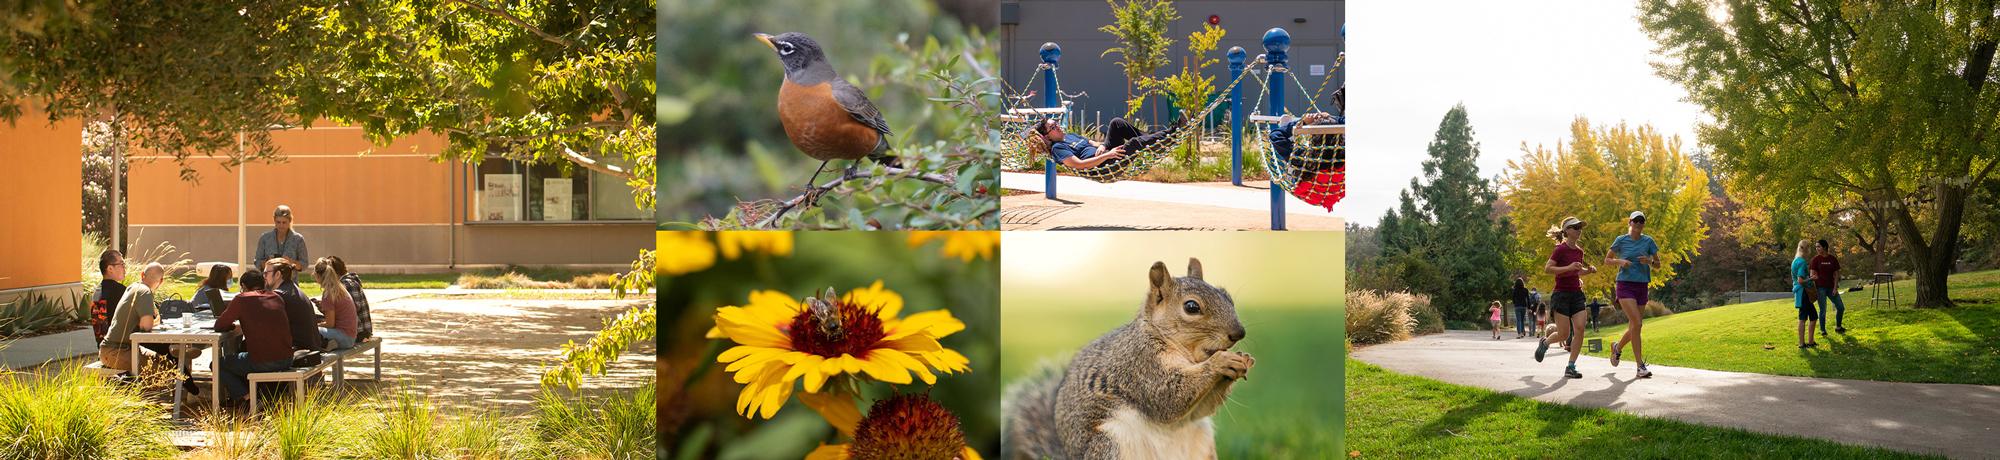 images of the outdoors at the UC Davis Campus